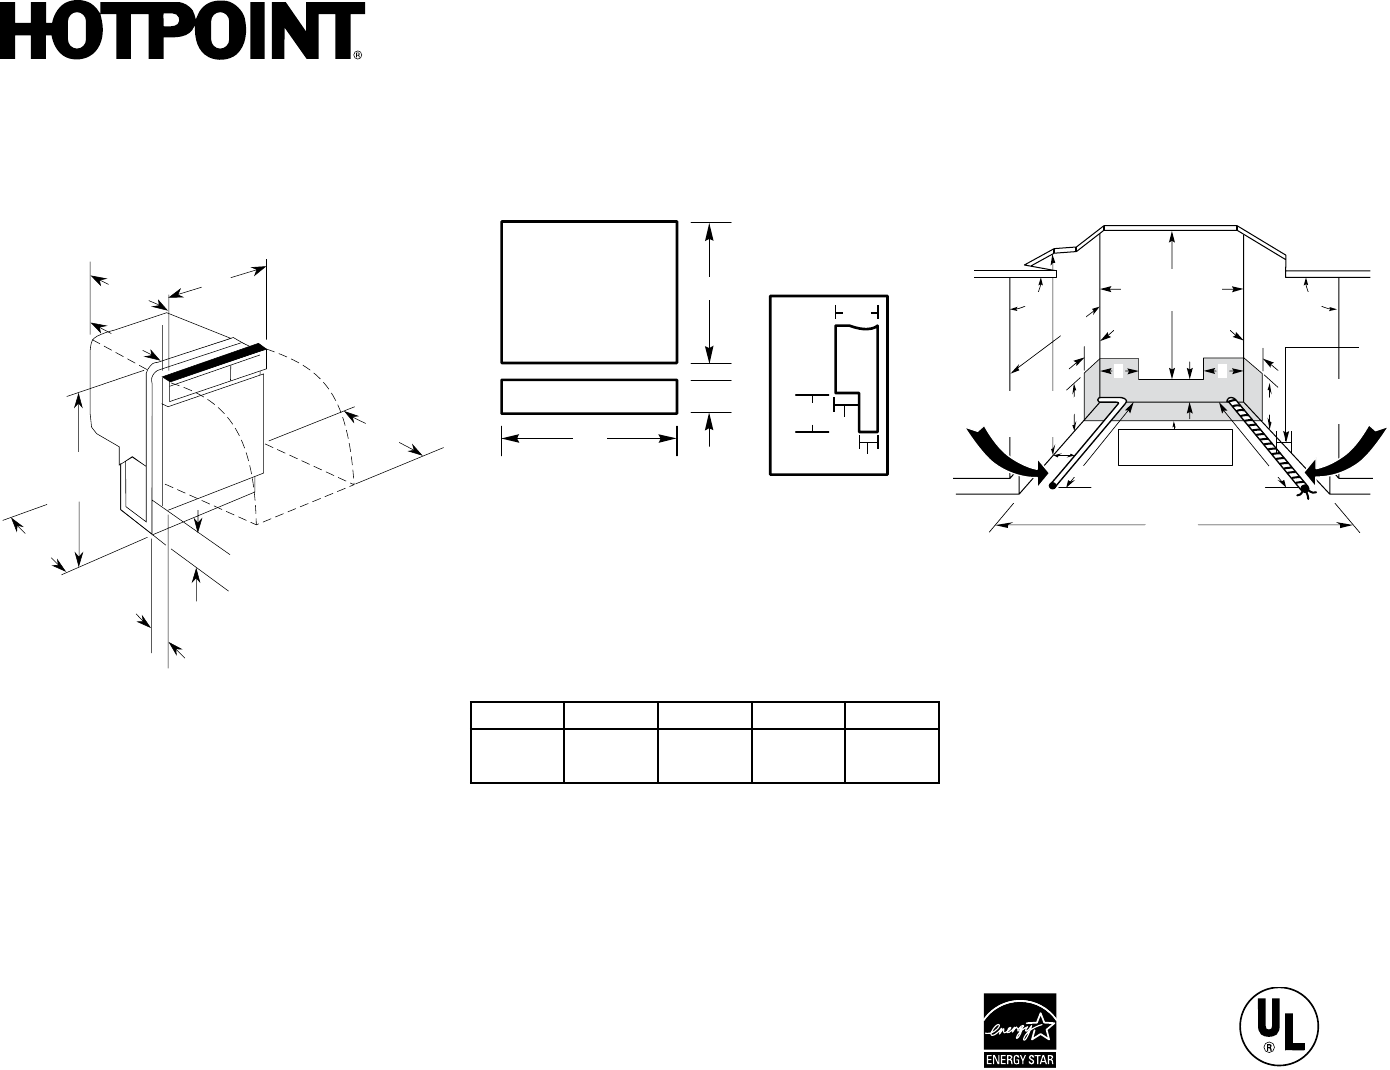 Service Manual For A Hotpoint Dishwasher